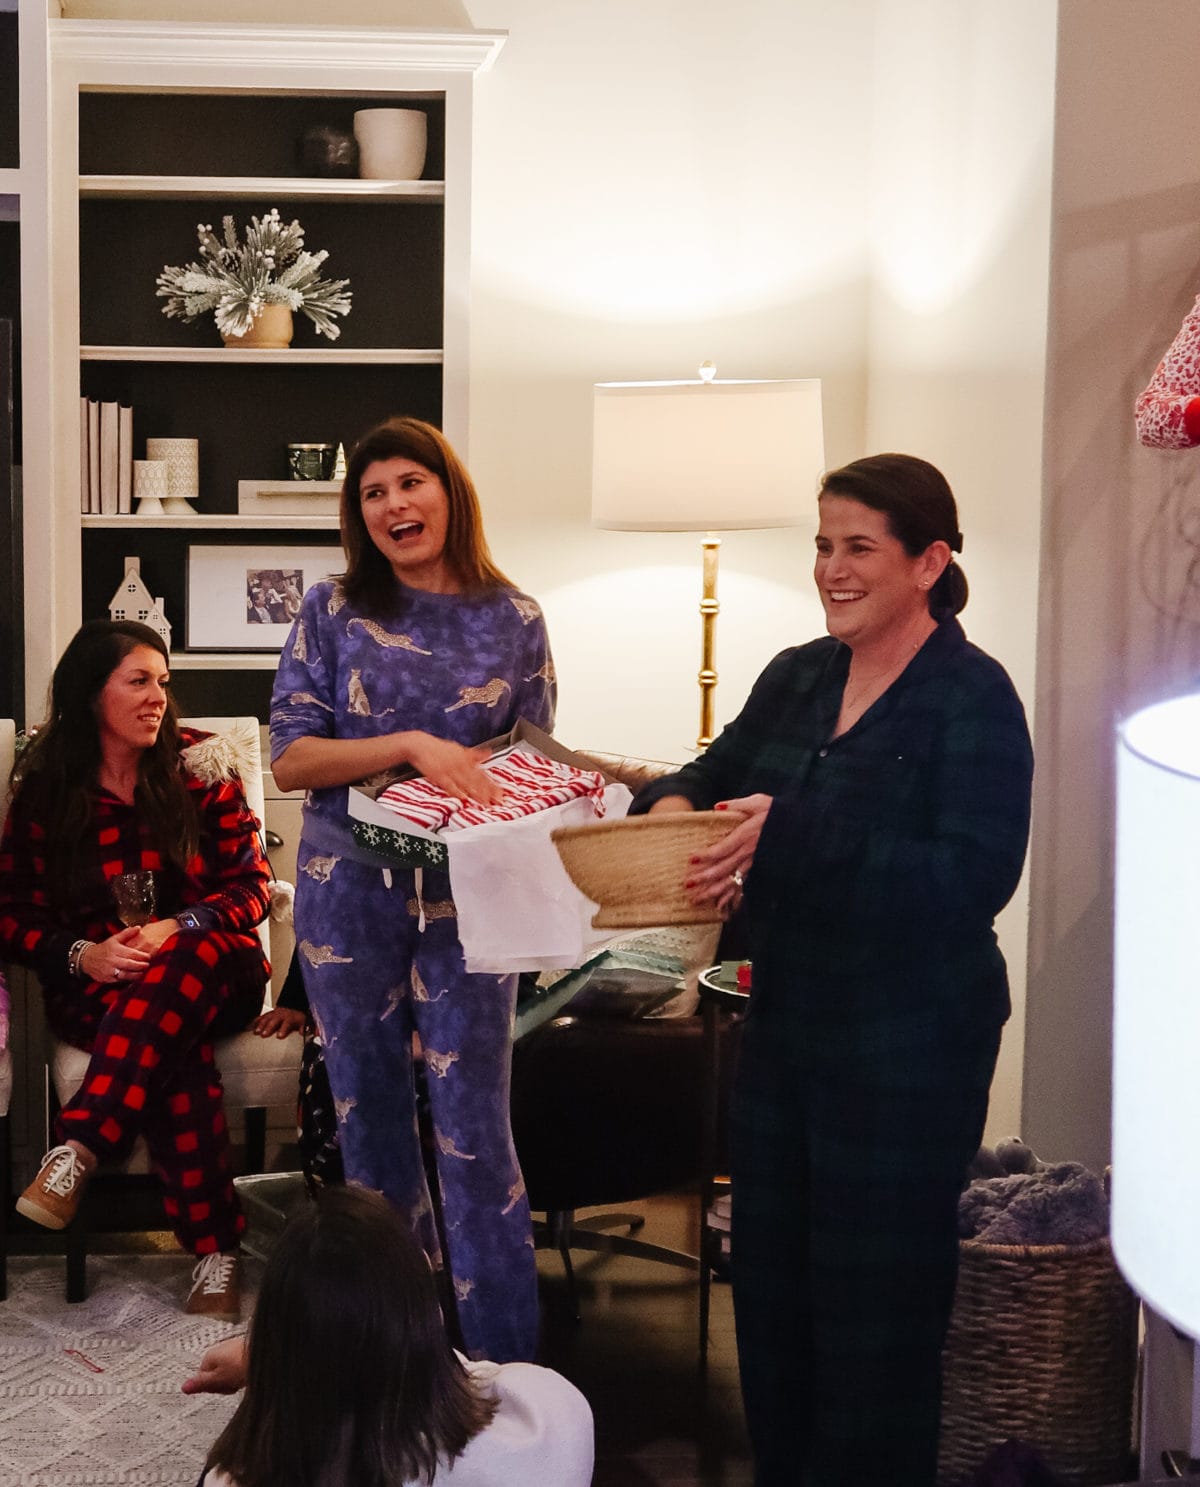 Our Favorite Things Party 2020 – Honey We're Home